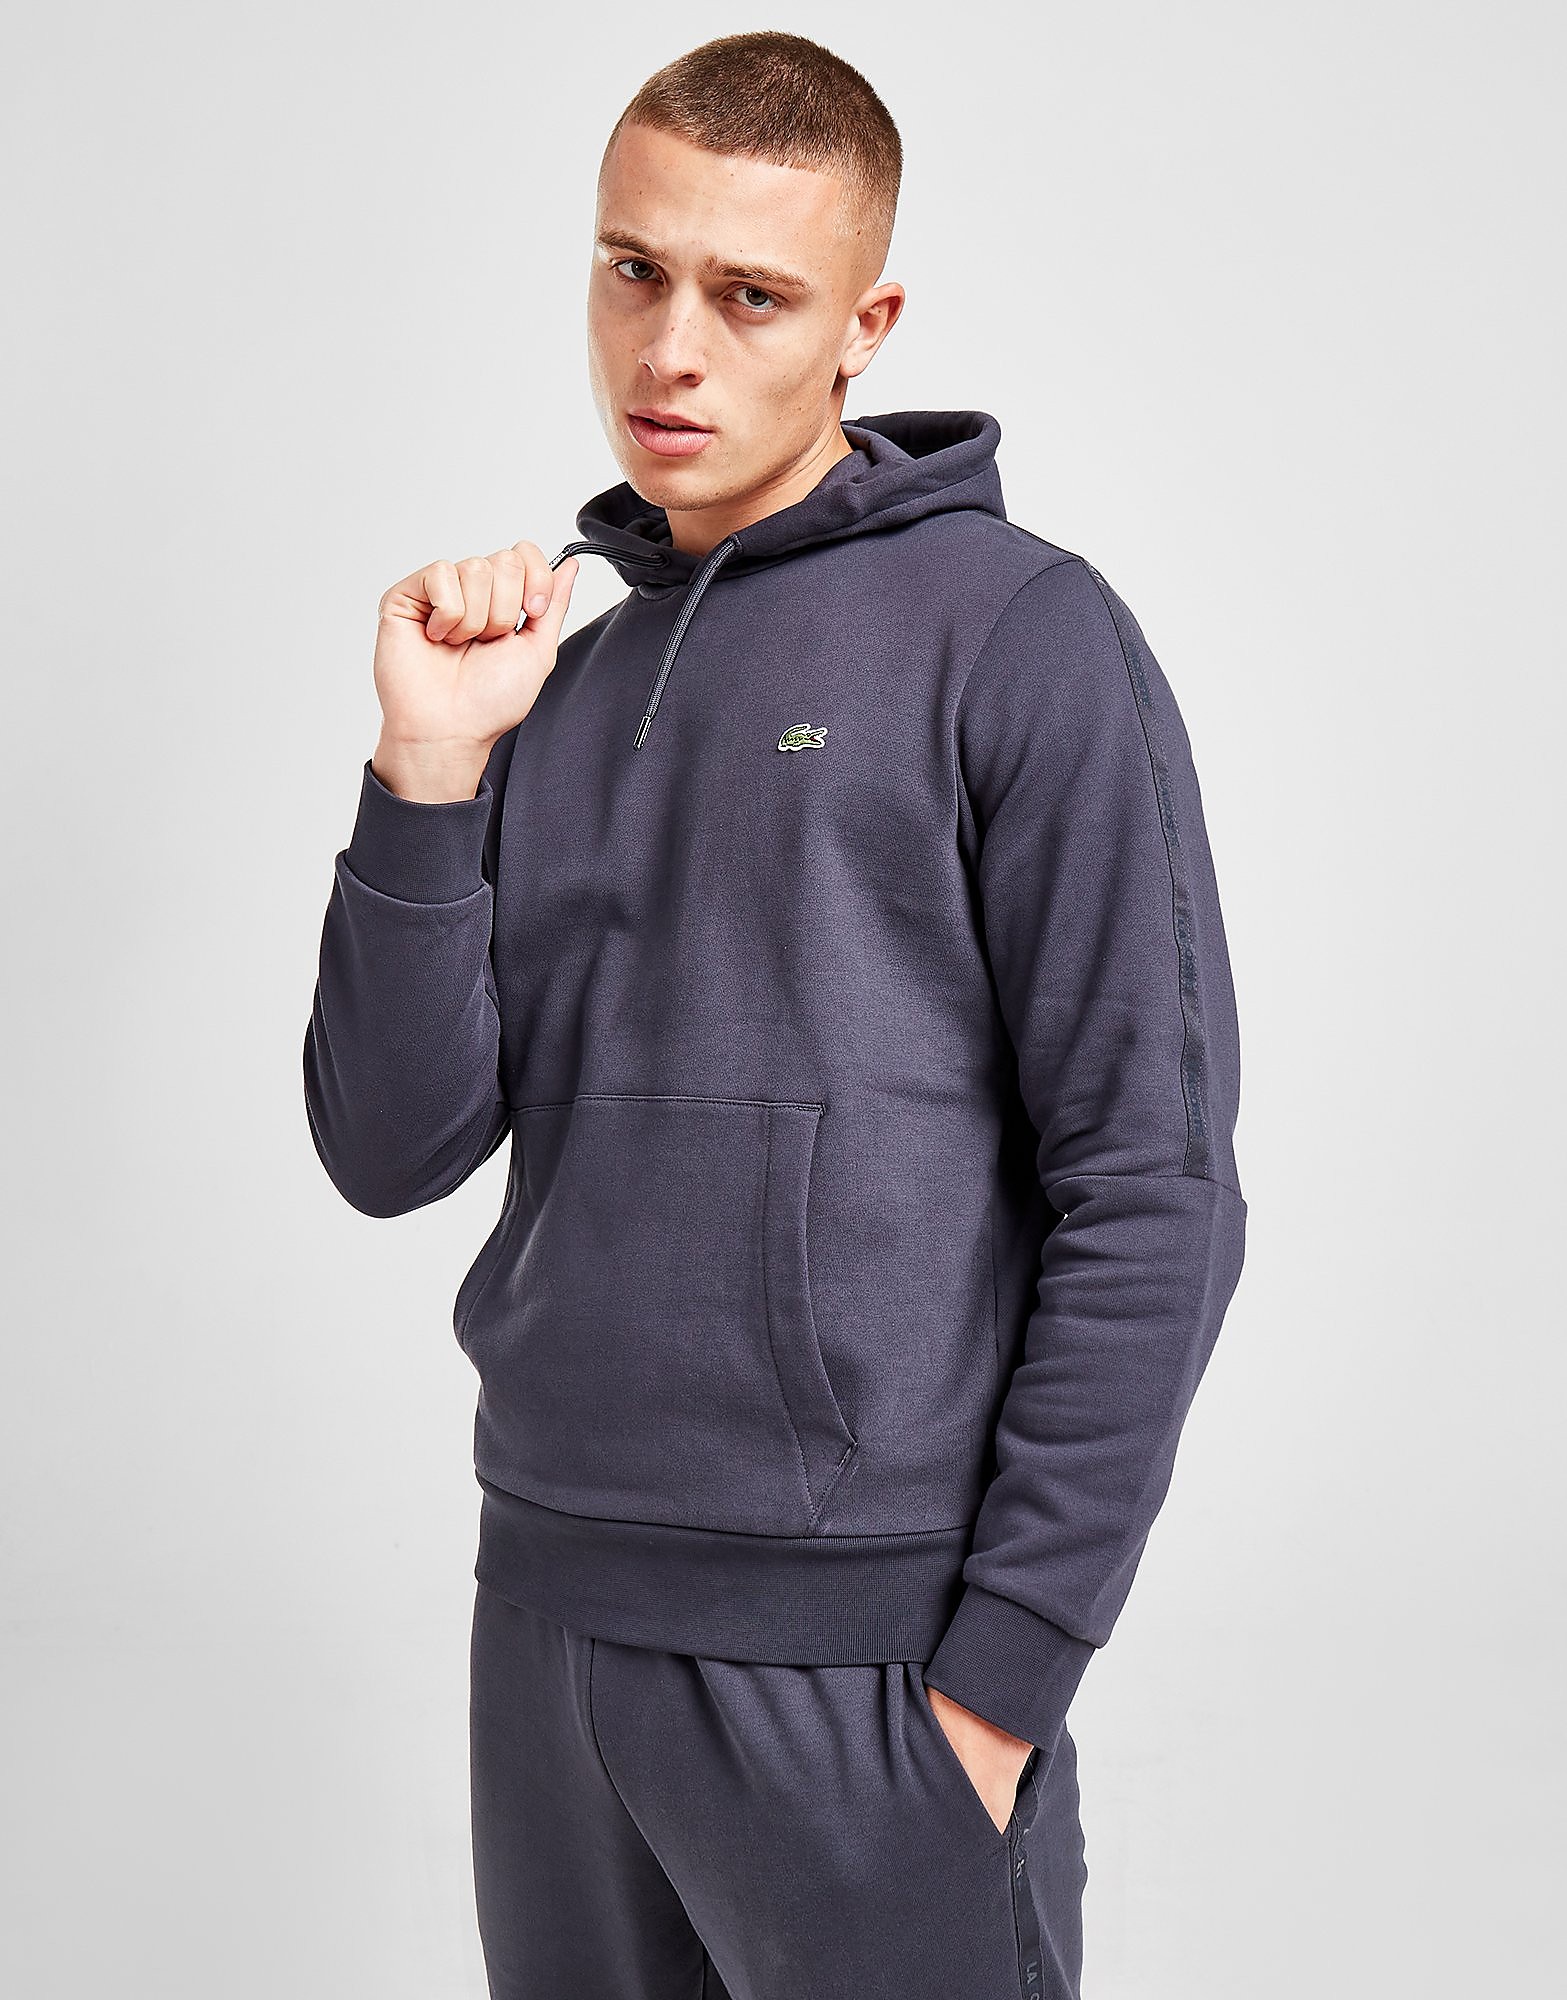 

Lacoste Tonal Tape Overhead Hoodie - Only at JD - Grey - Mens, Grey